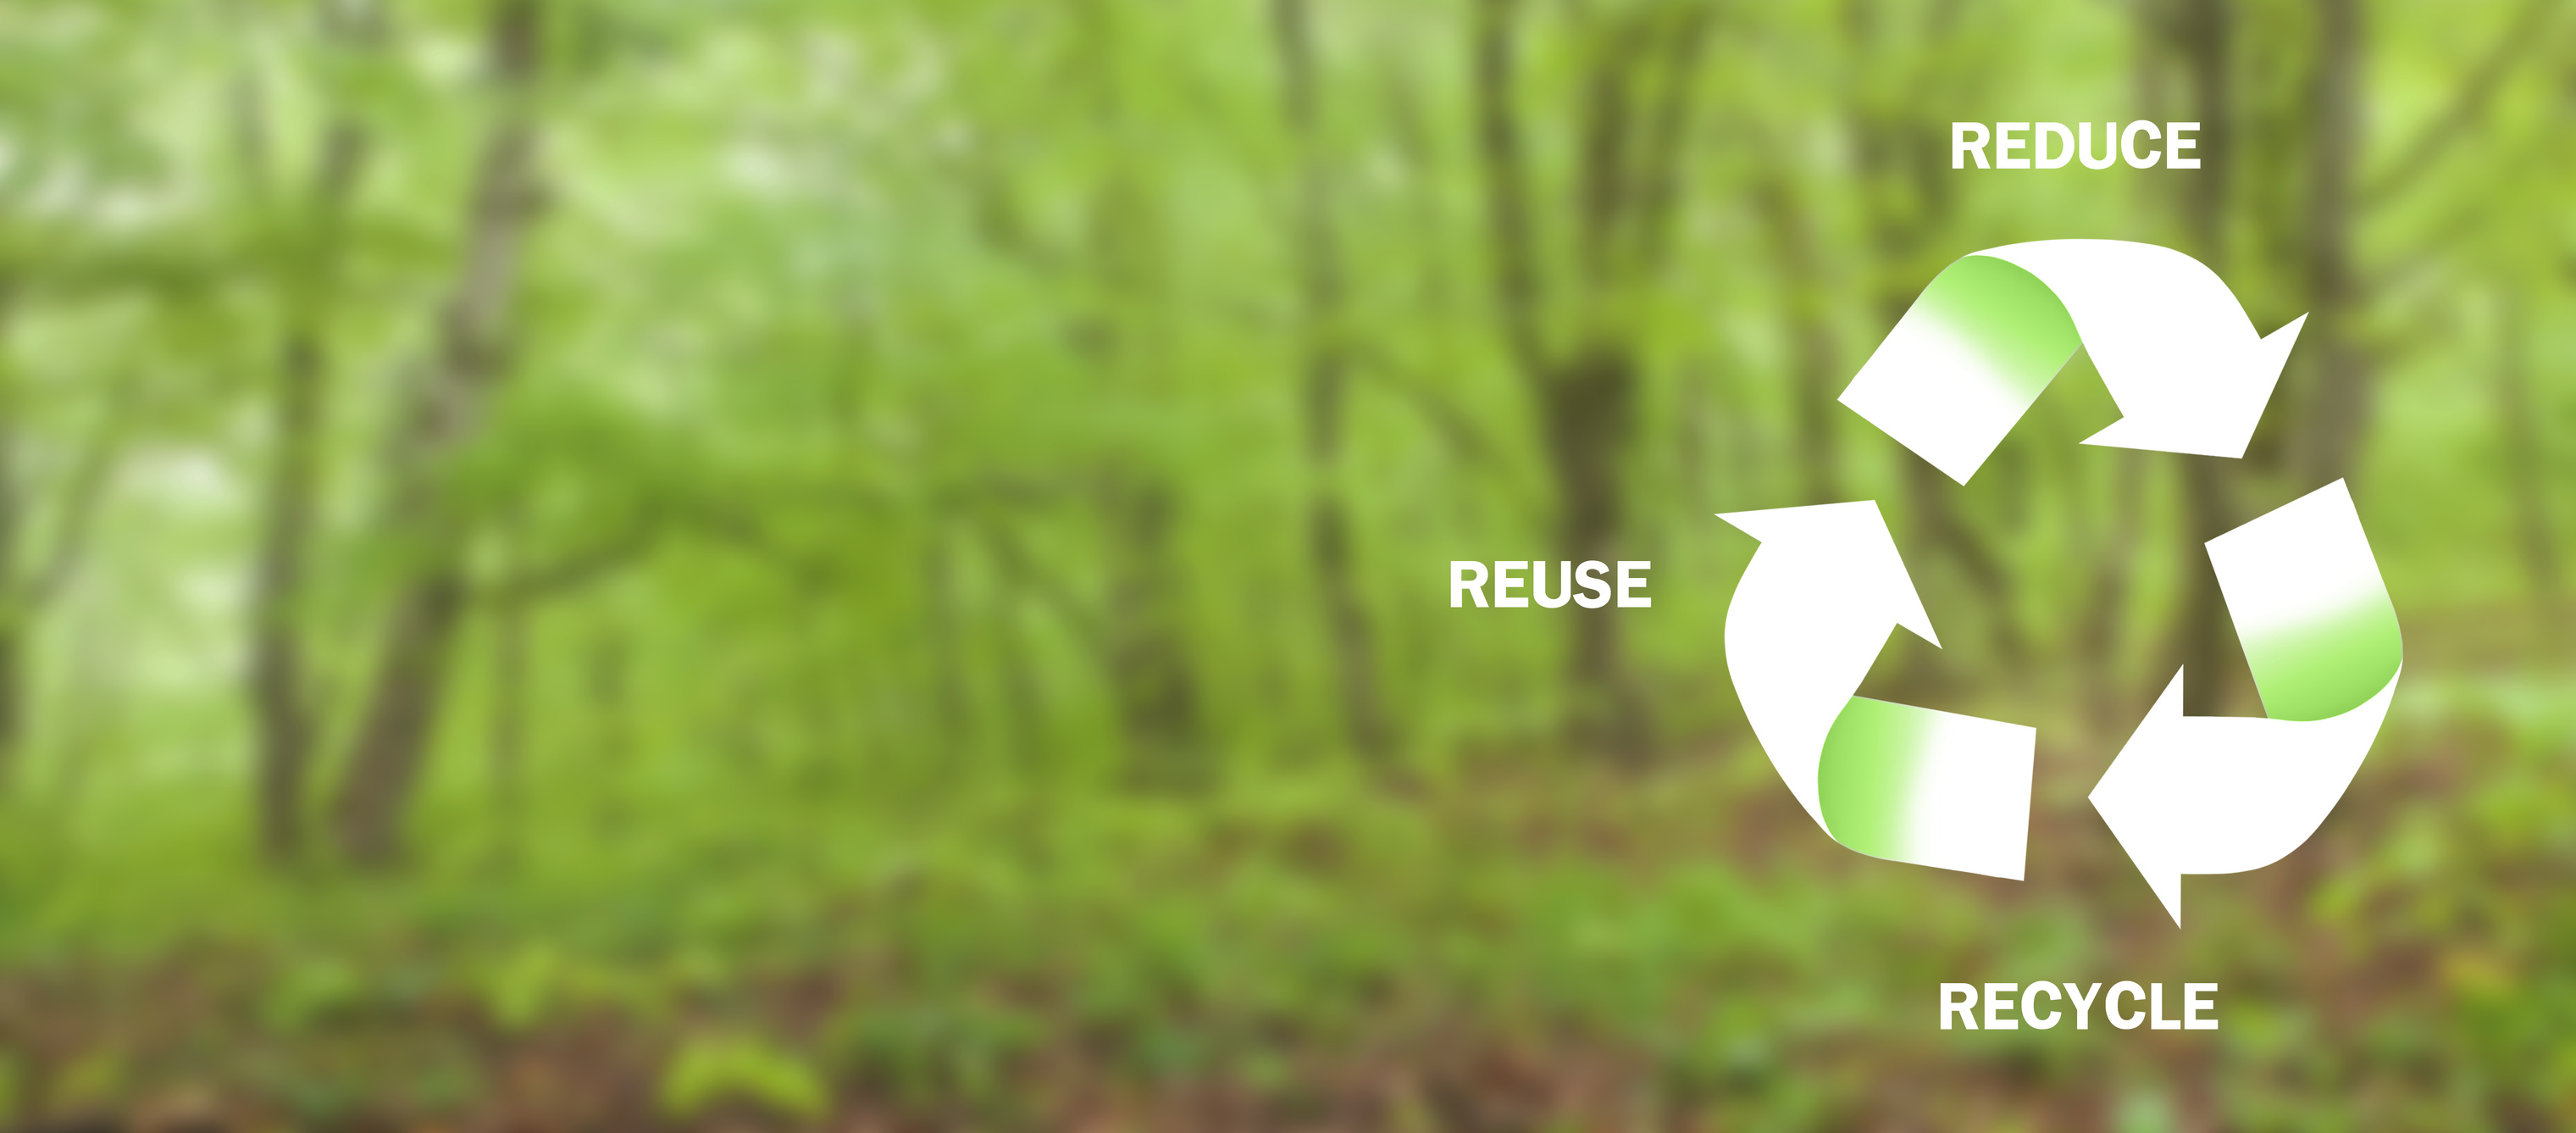 Reduce. Reuse. Recycle. Ecology. Renew concept